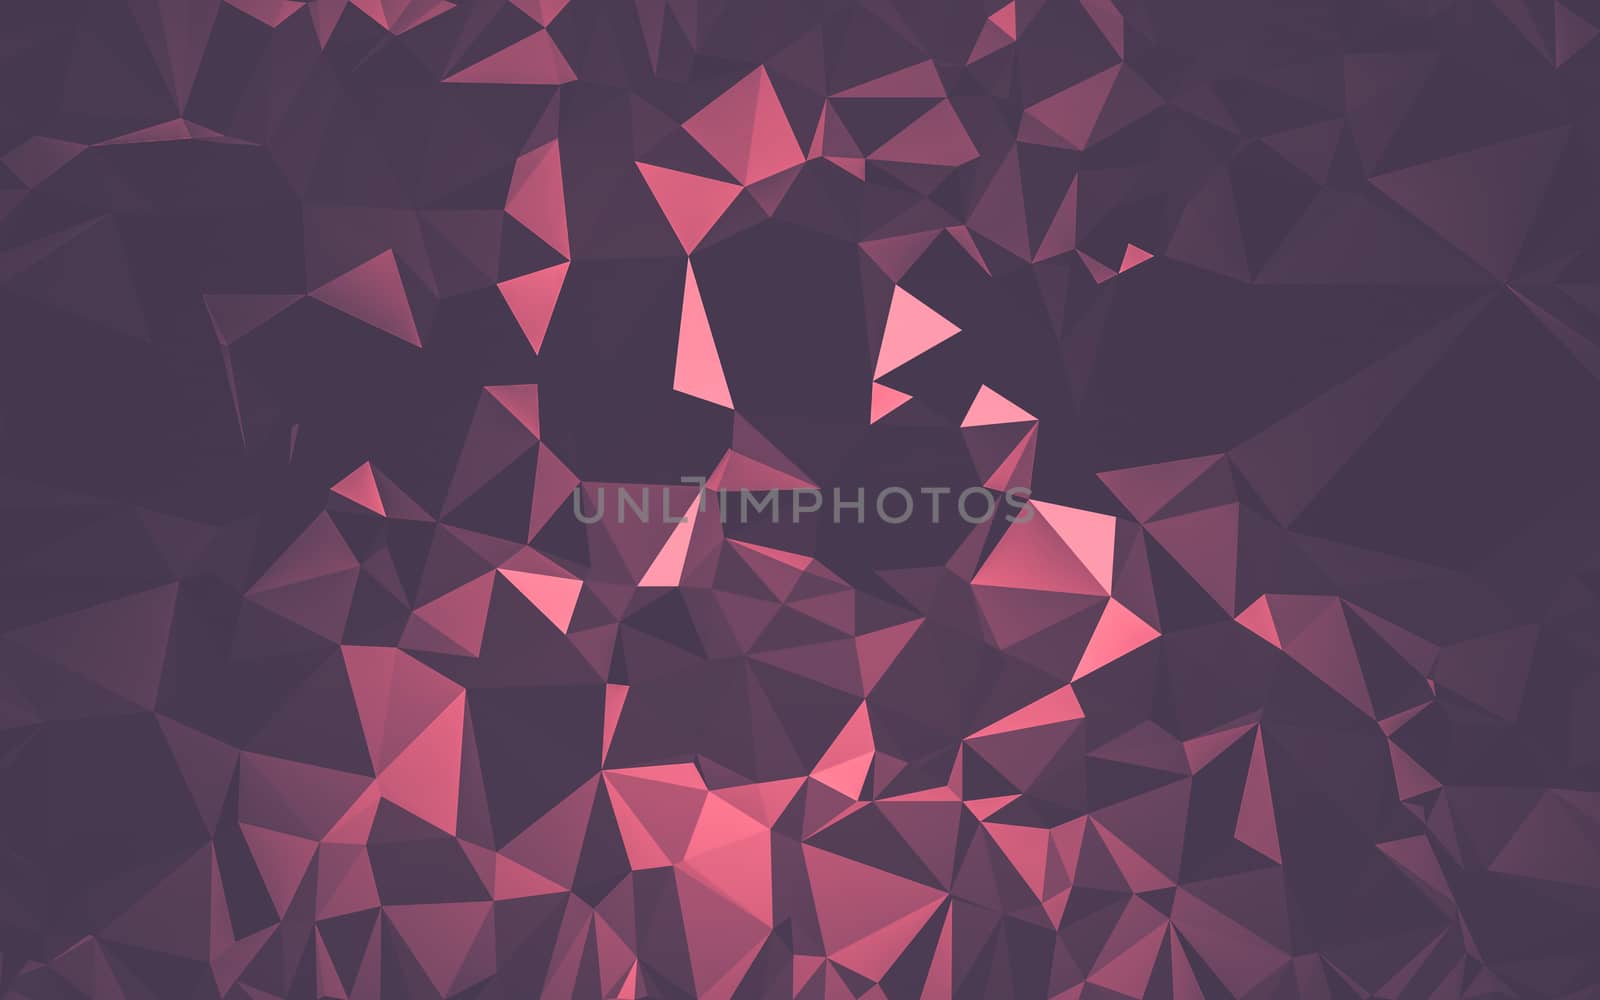 Abstract low poly background, geometry triangle, mosaic pastel color background